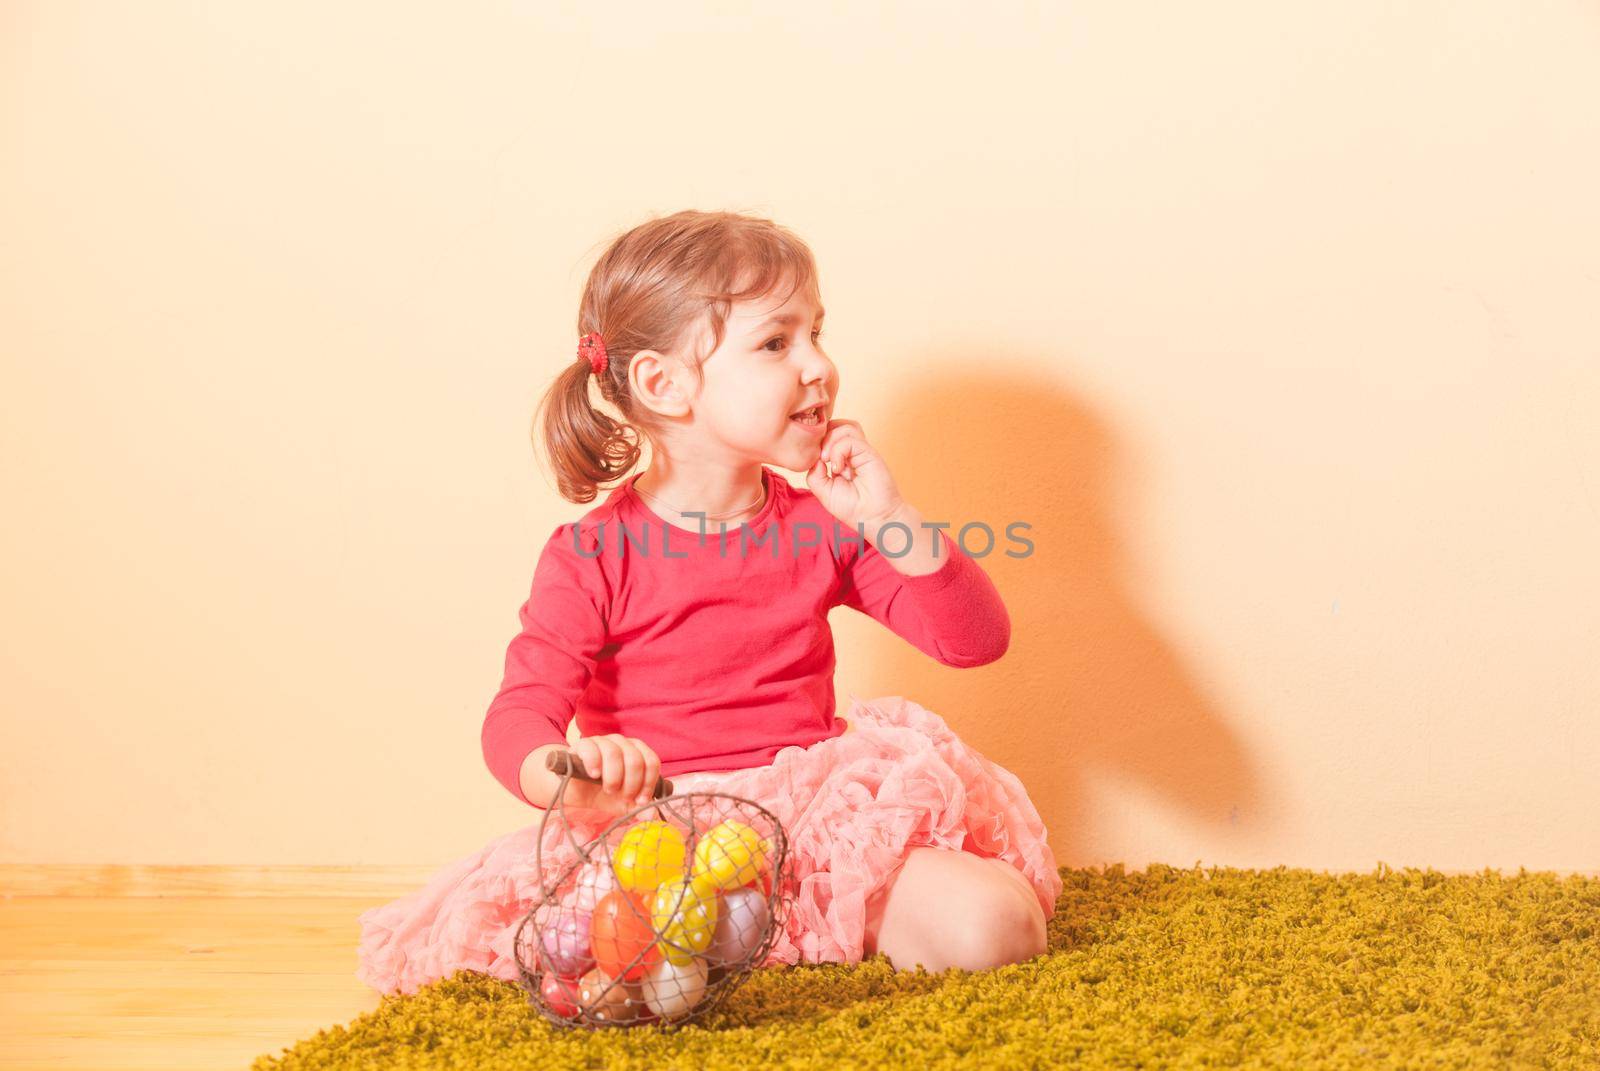 Kid gathers colorful eggs to the baskets on Easter Egg hunt